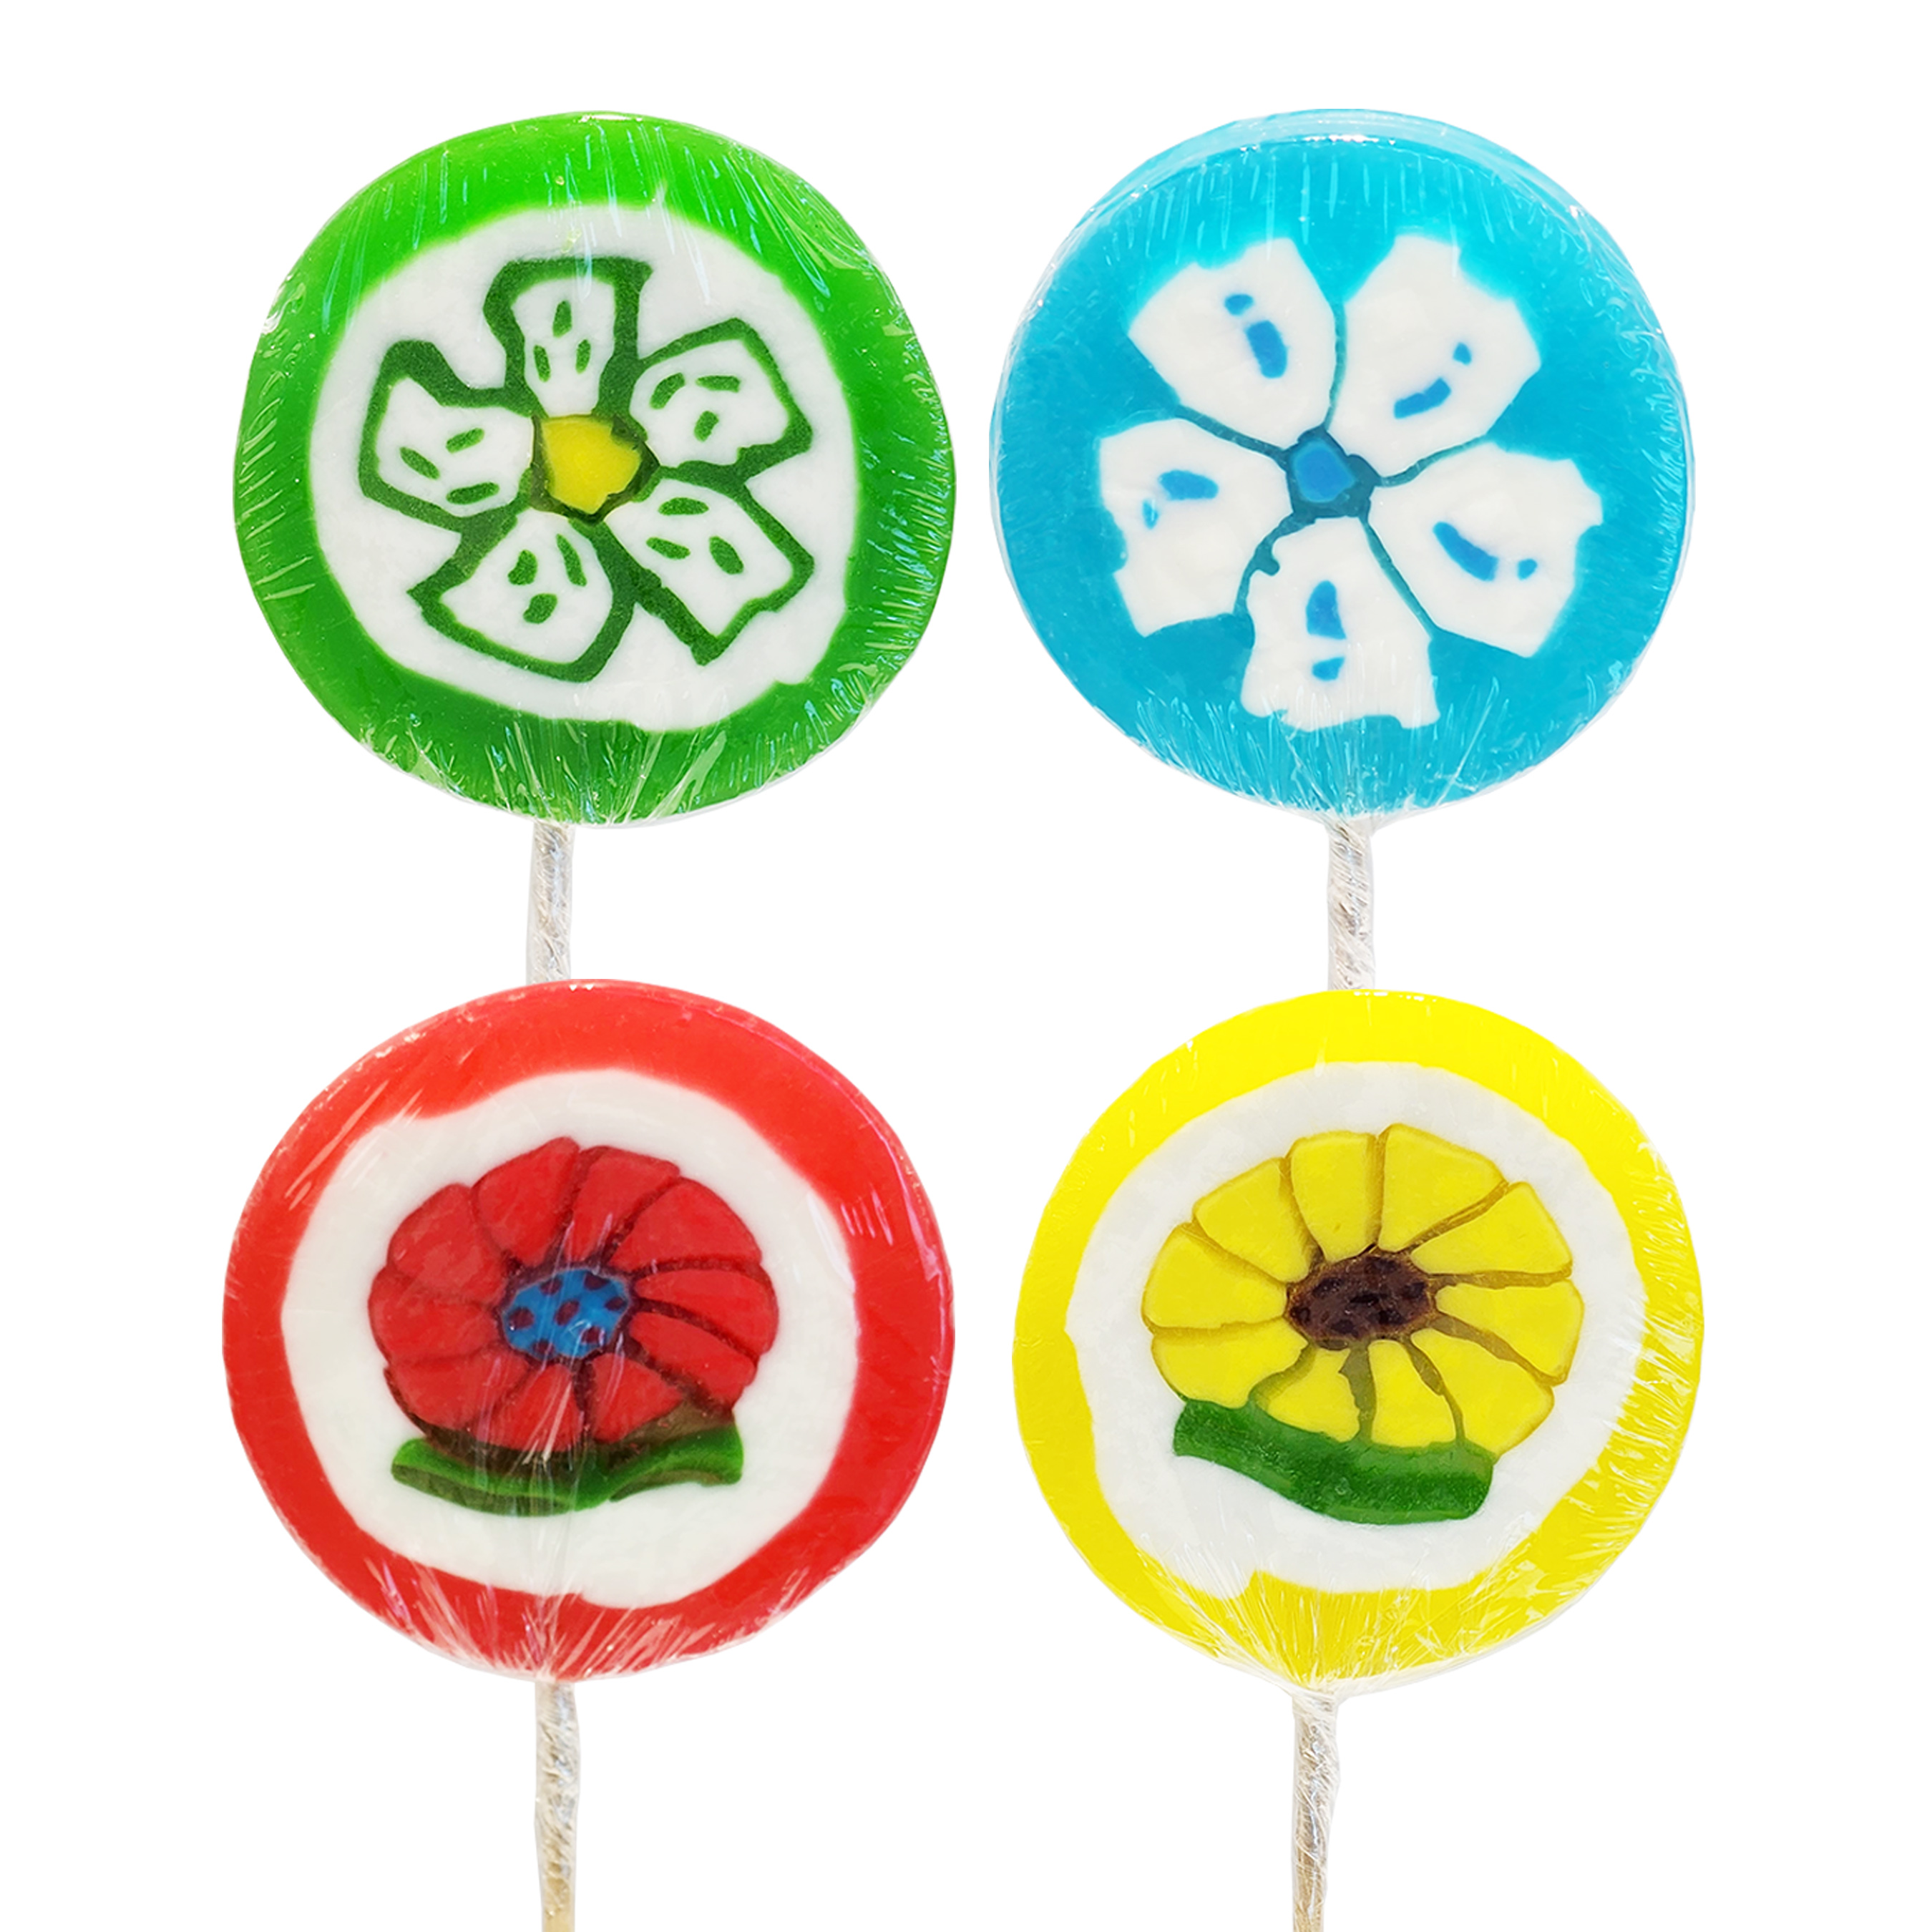 Jumbo Flowers style. 20 pieces per bag. lollipops include green, blue, yellow, red. 